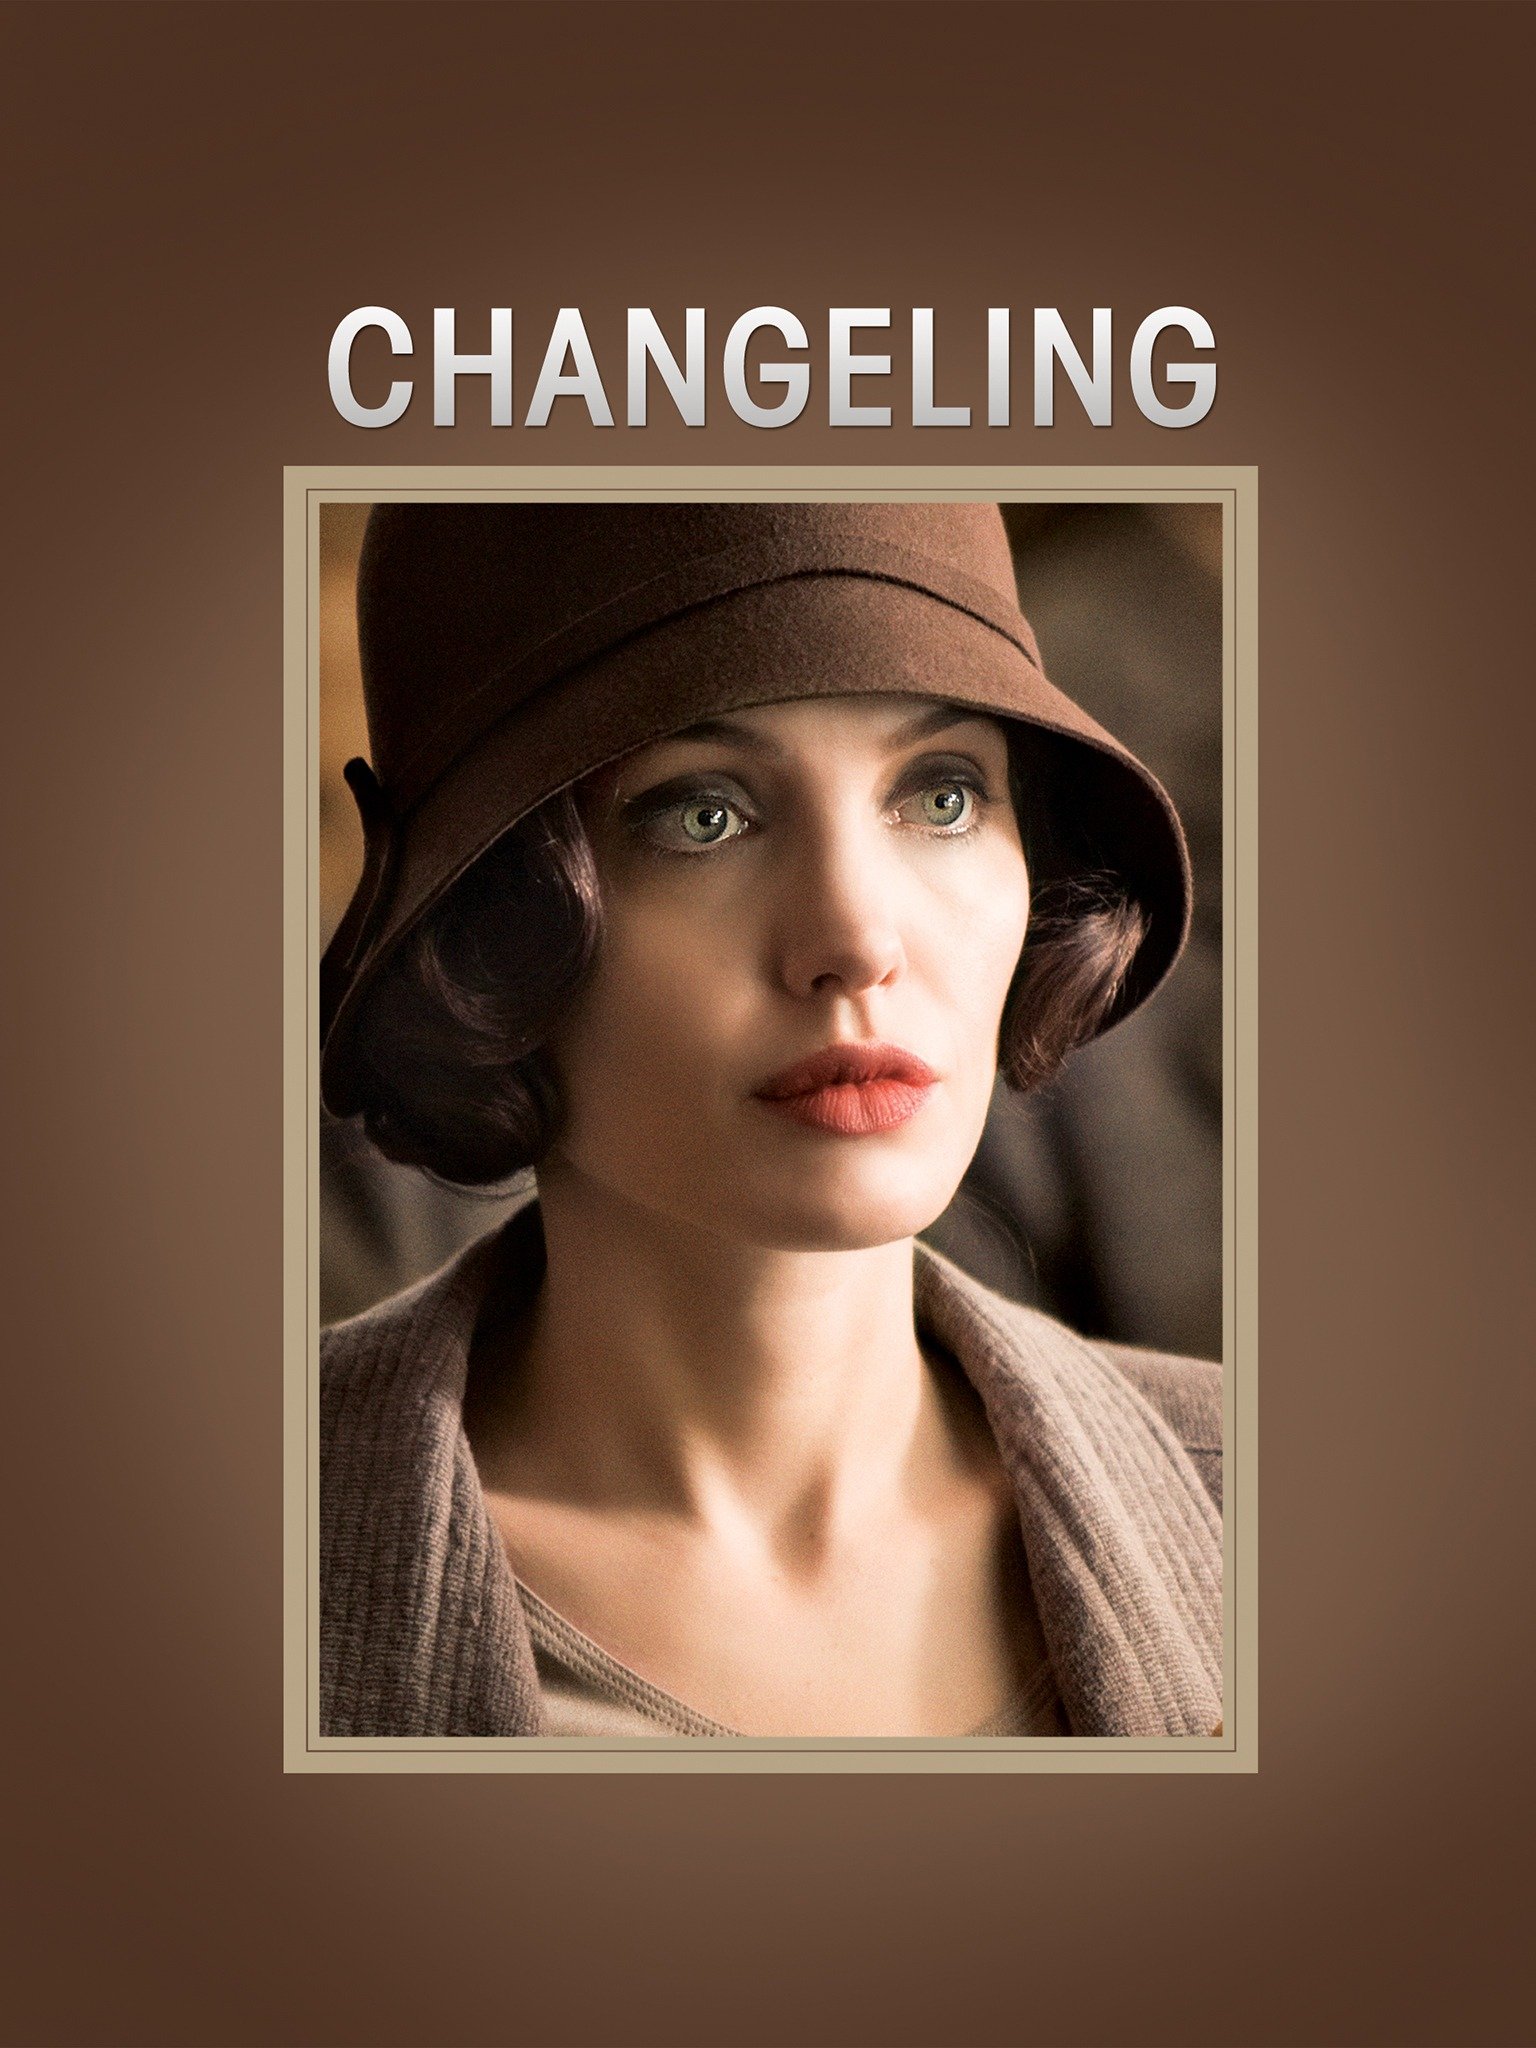 Changeling 2008 Rotten Tomatoes